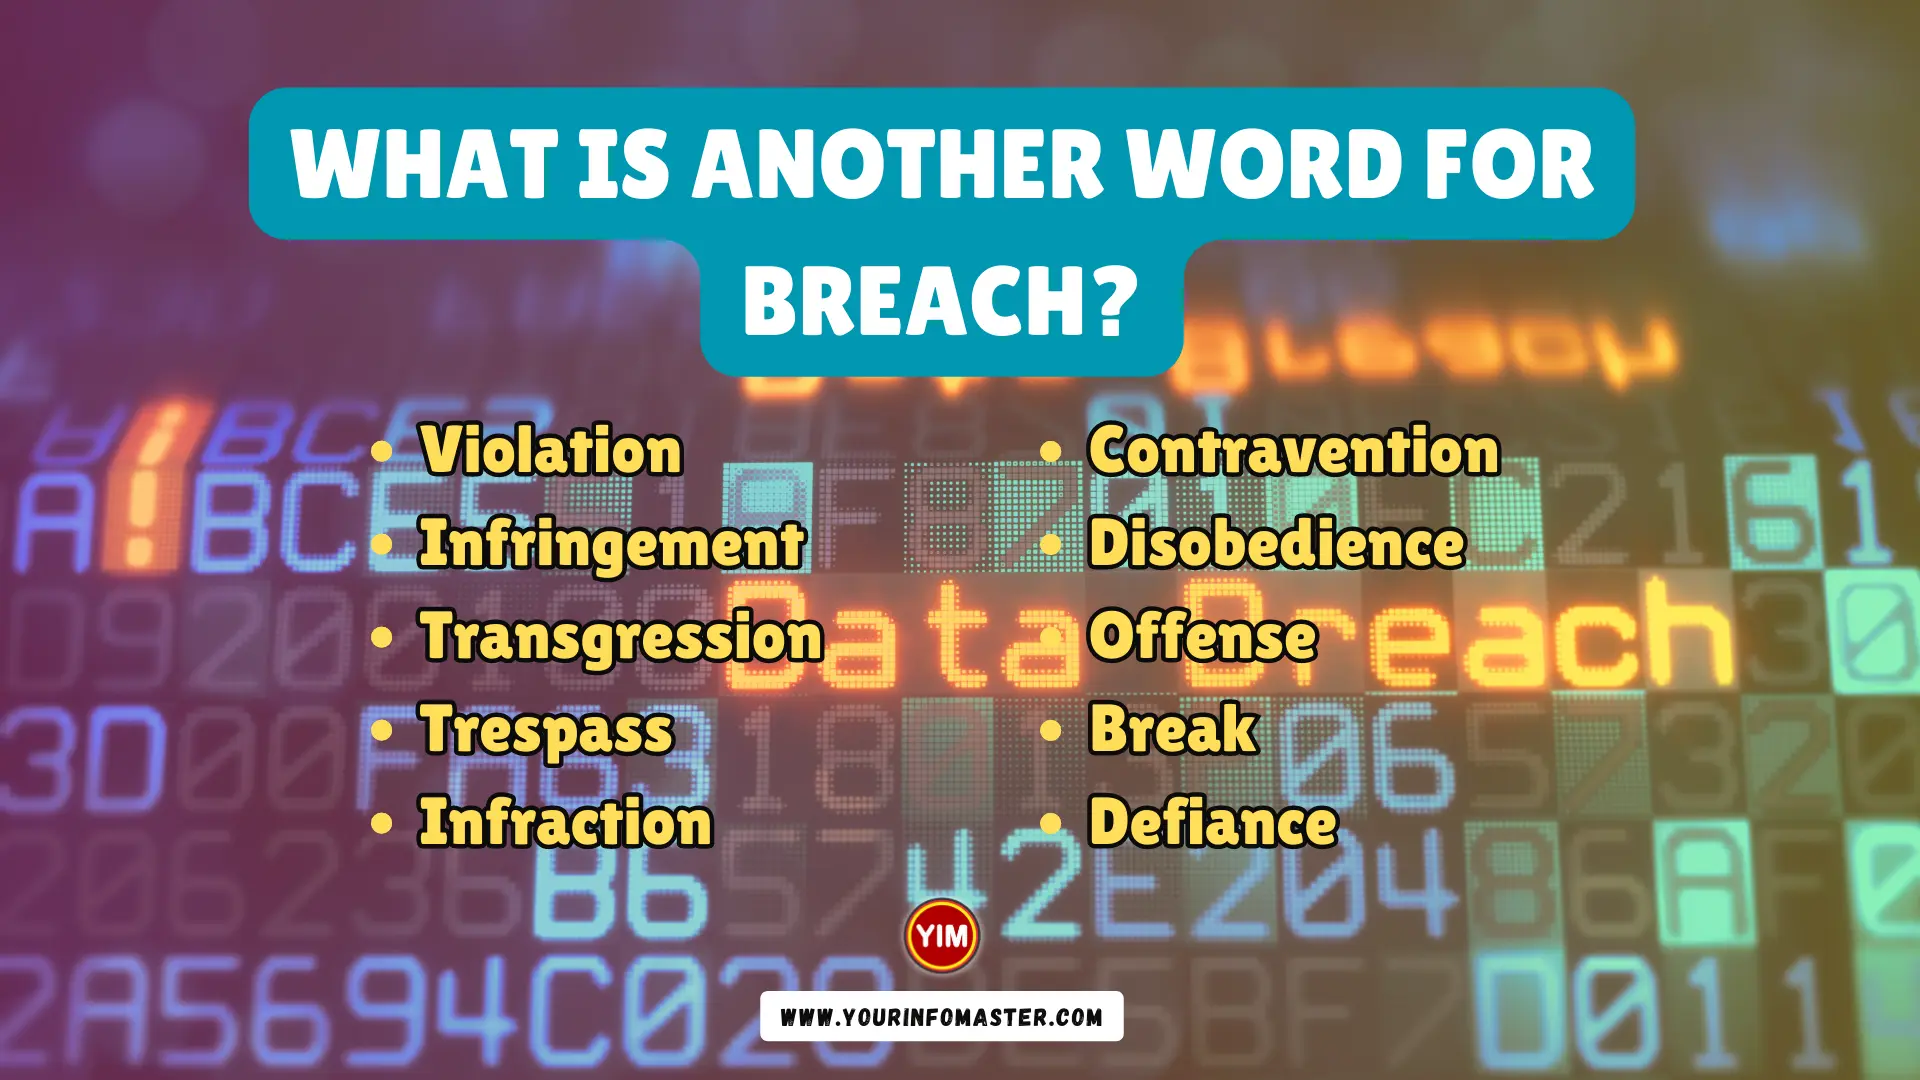 What is another word for Breach